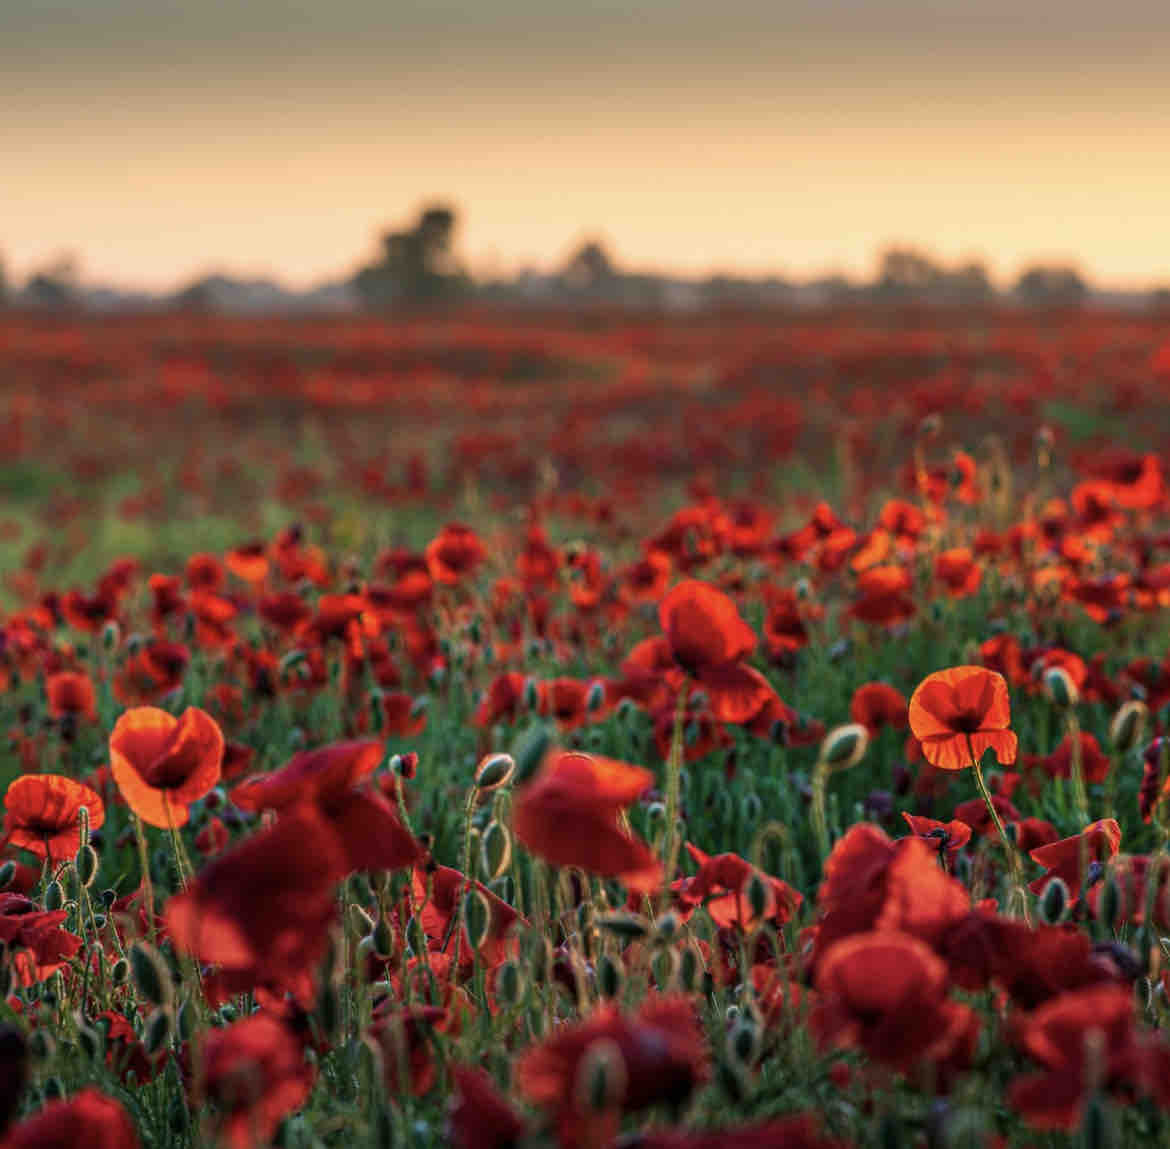 Remembering all our fallen servicemen & women, and all those who have fought for us and our freedoms. To all our residents, colleagues, friends & families, at the going down of the sun. We will remember them. #LestWeForget